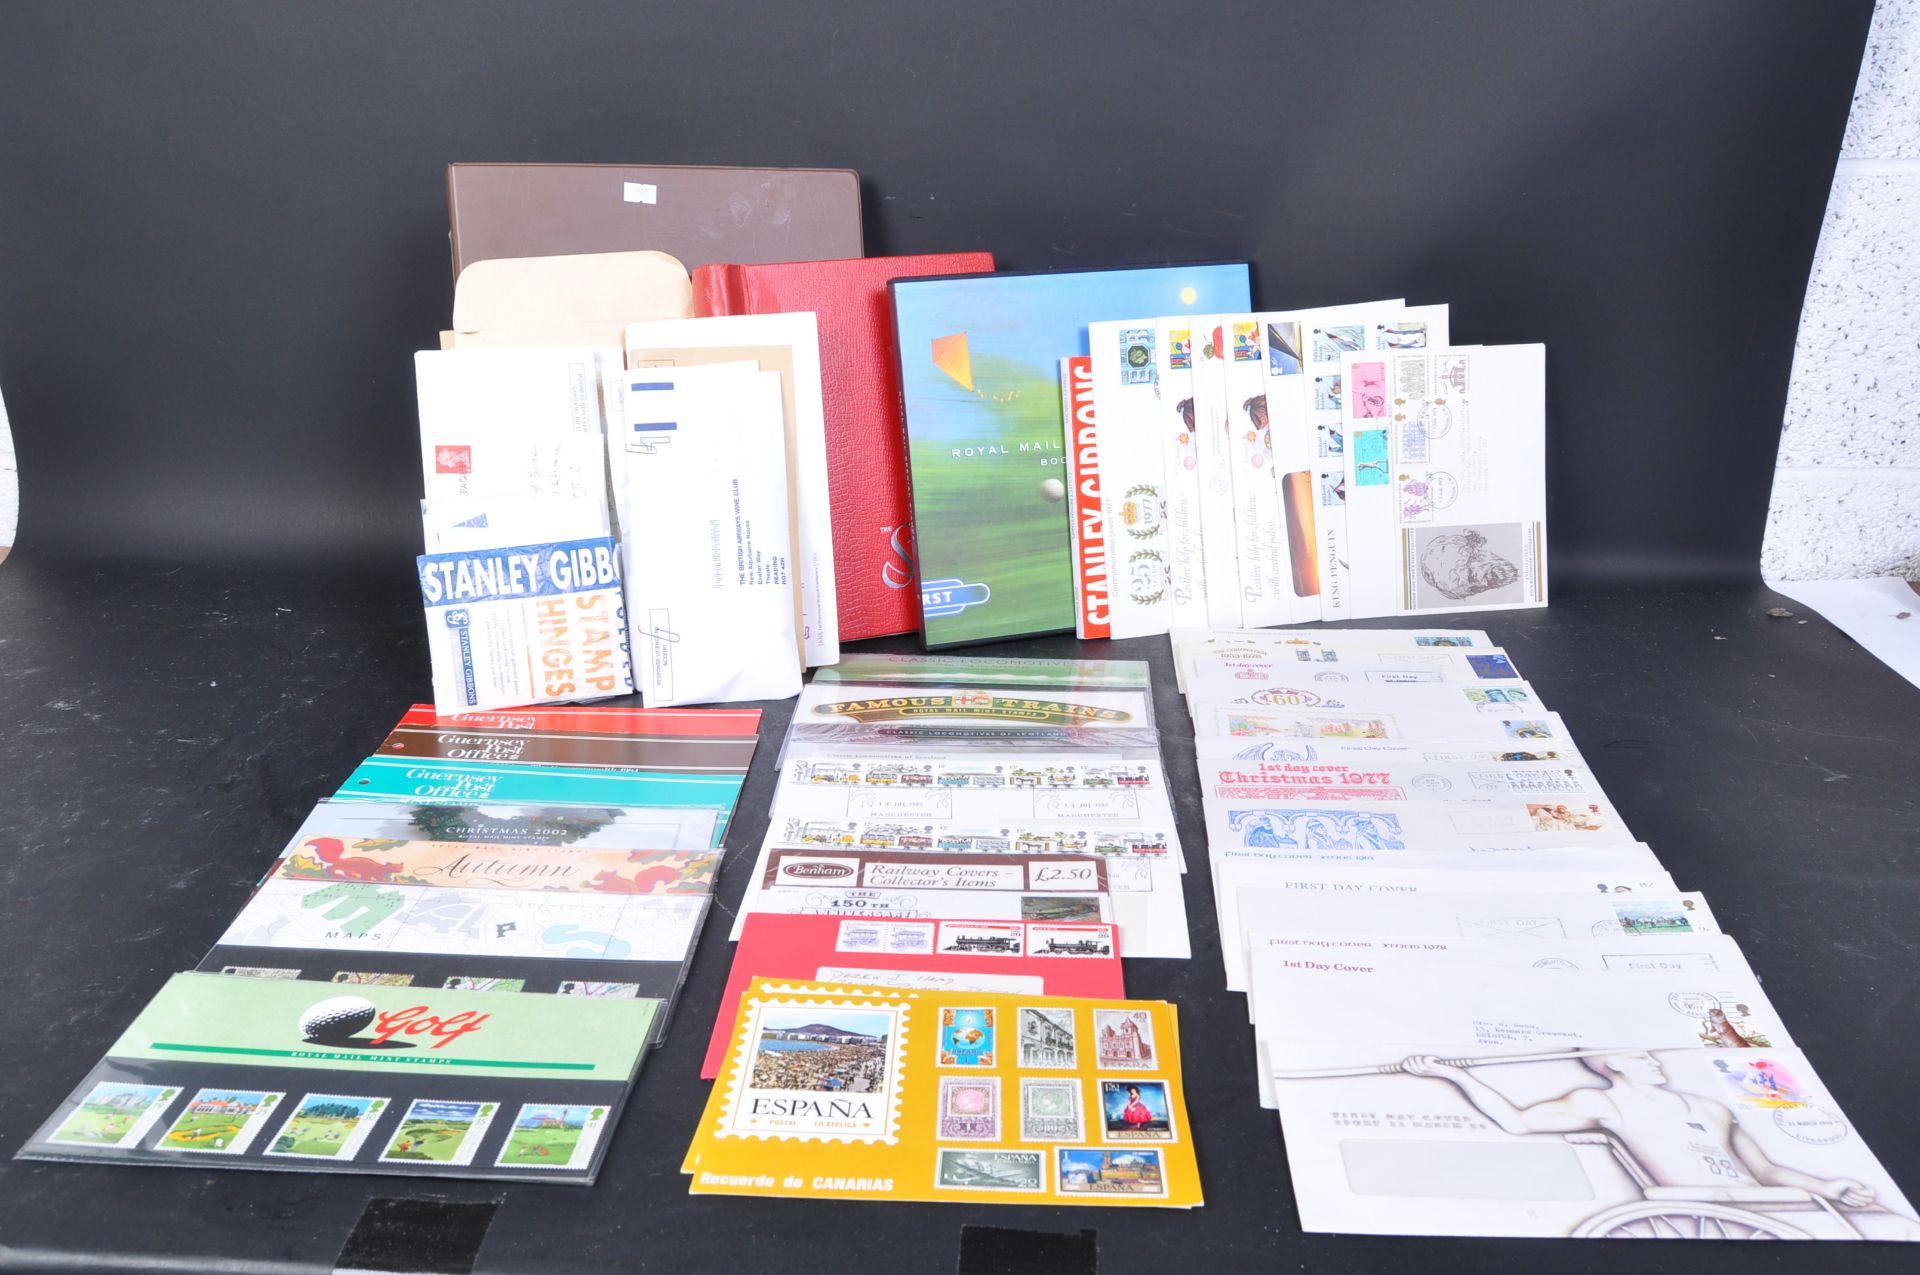 STAMP ALBUMS - 1ST DAY COVERS - PRESENTATIONAL STAMPS ETC